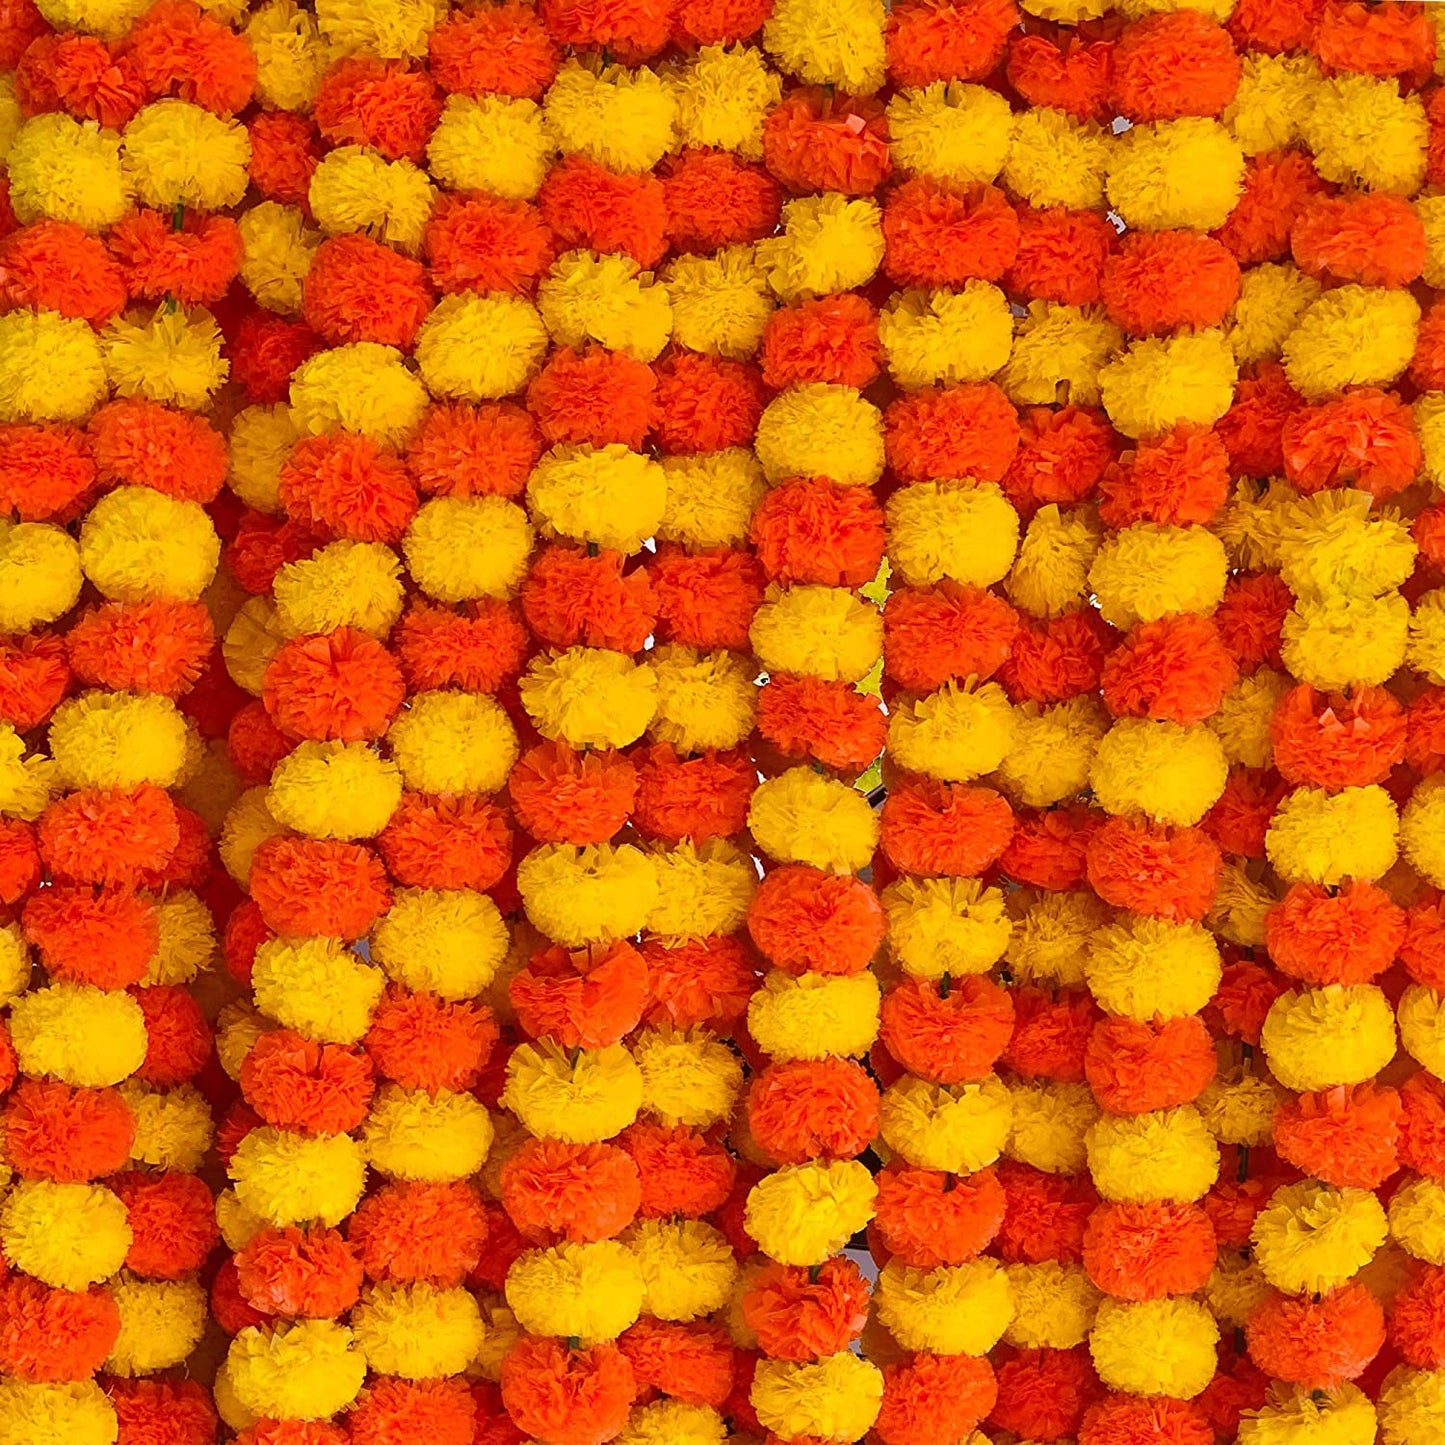 MangalFashions Artificial Marigold Garland | 5 Strings Pack - 4.5 Feet Each | Indian/American Decor for Pooja, Wedding, Christmas, Events, Party Mangal Fashions | Indian Home Decor and Craft